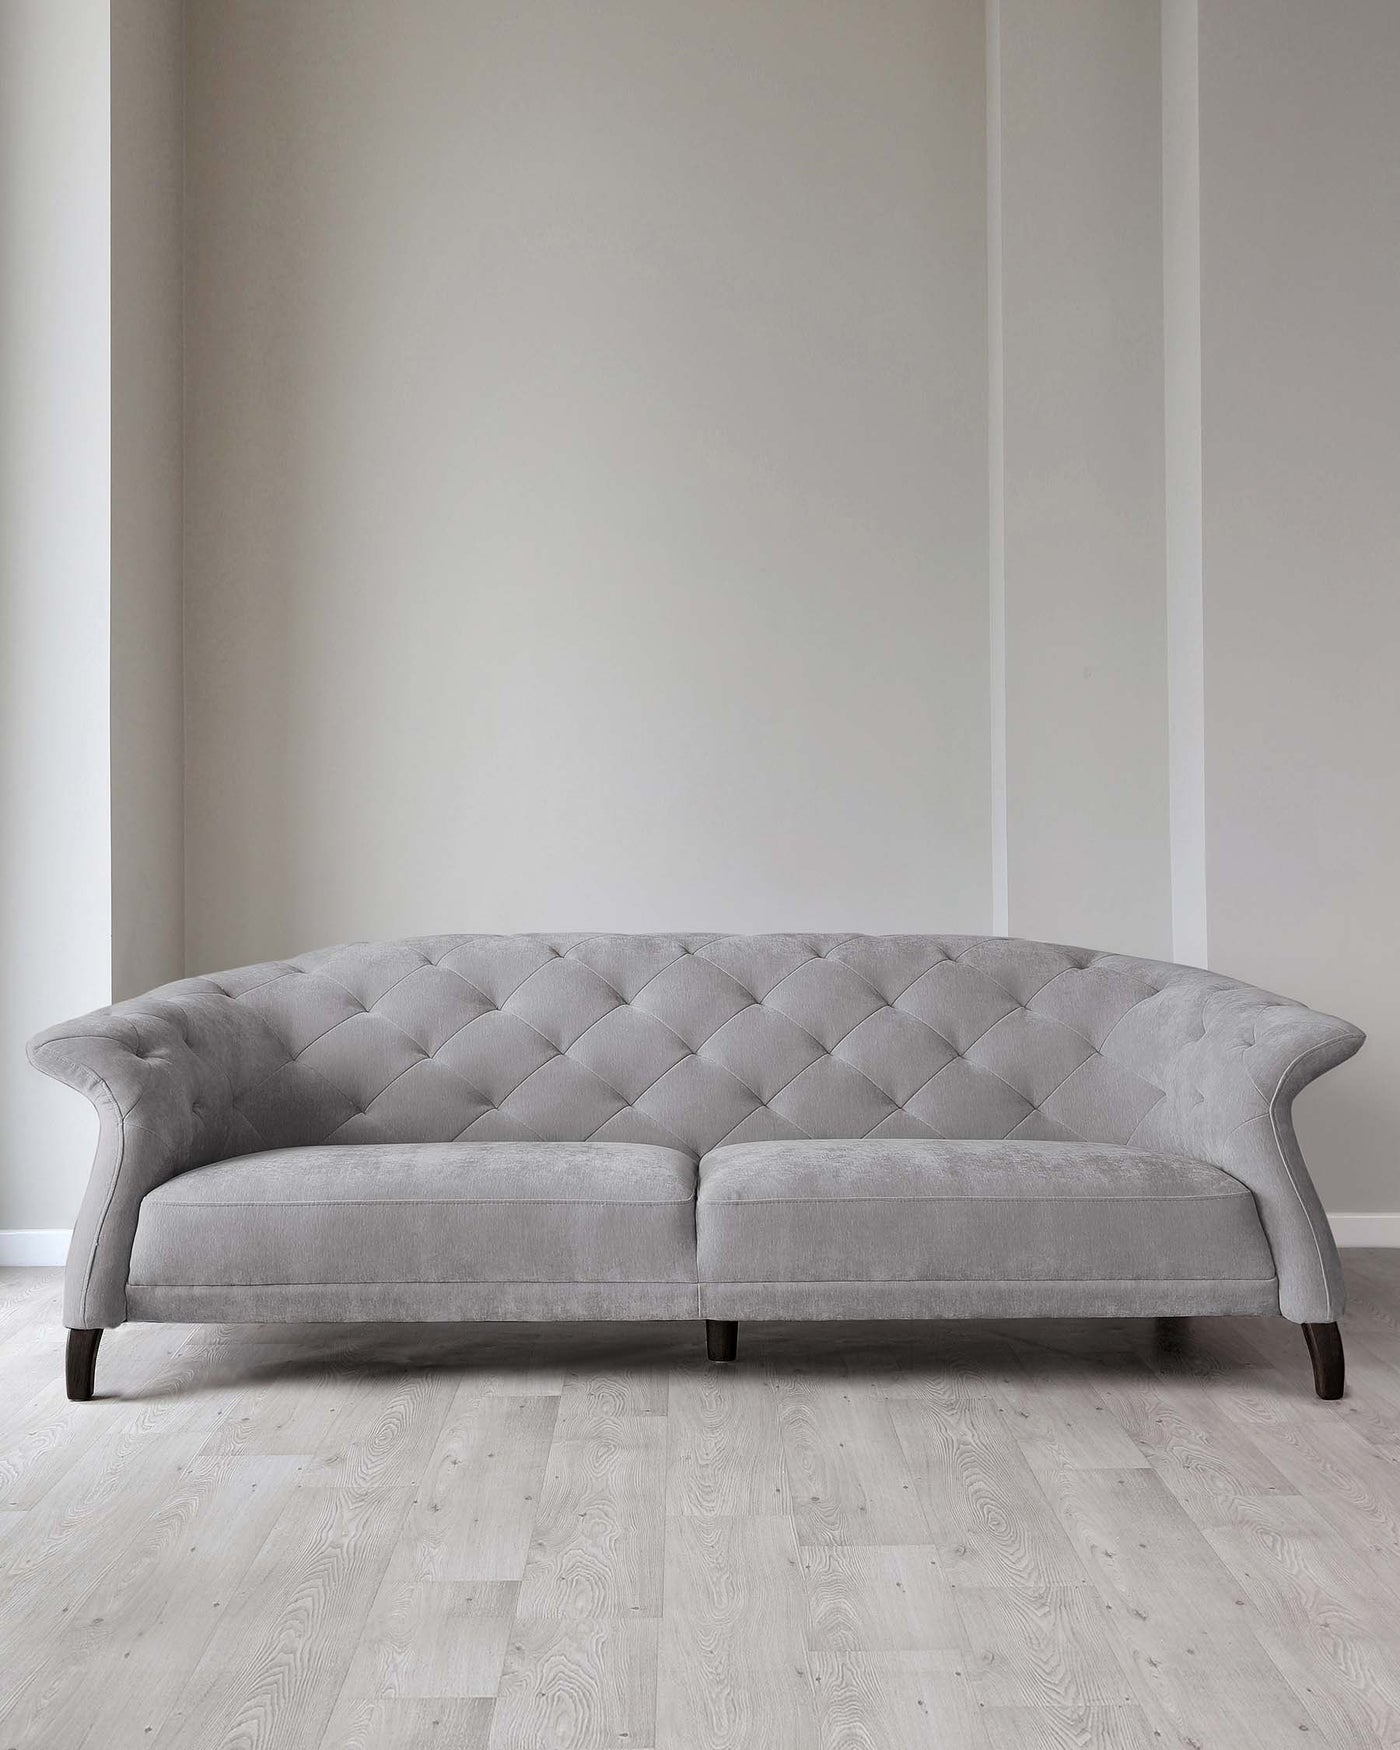 Elegant grey tufted fabric sofa with a curved silhouette and low backrest, standing on wooden legs against a neutral wall on a light hardwood floor.